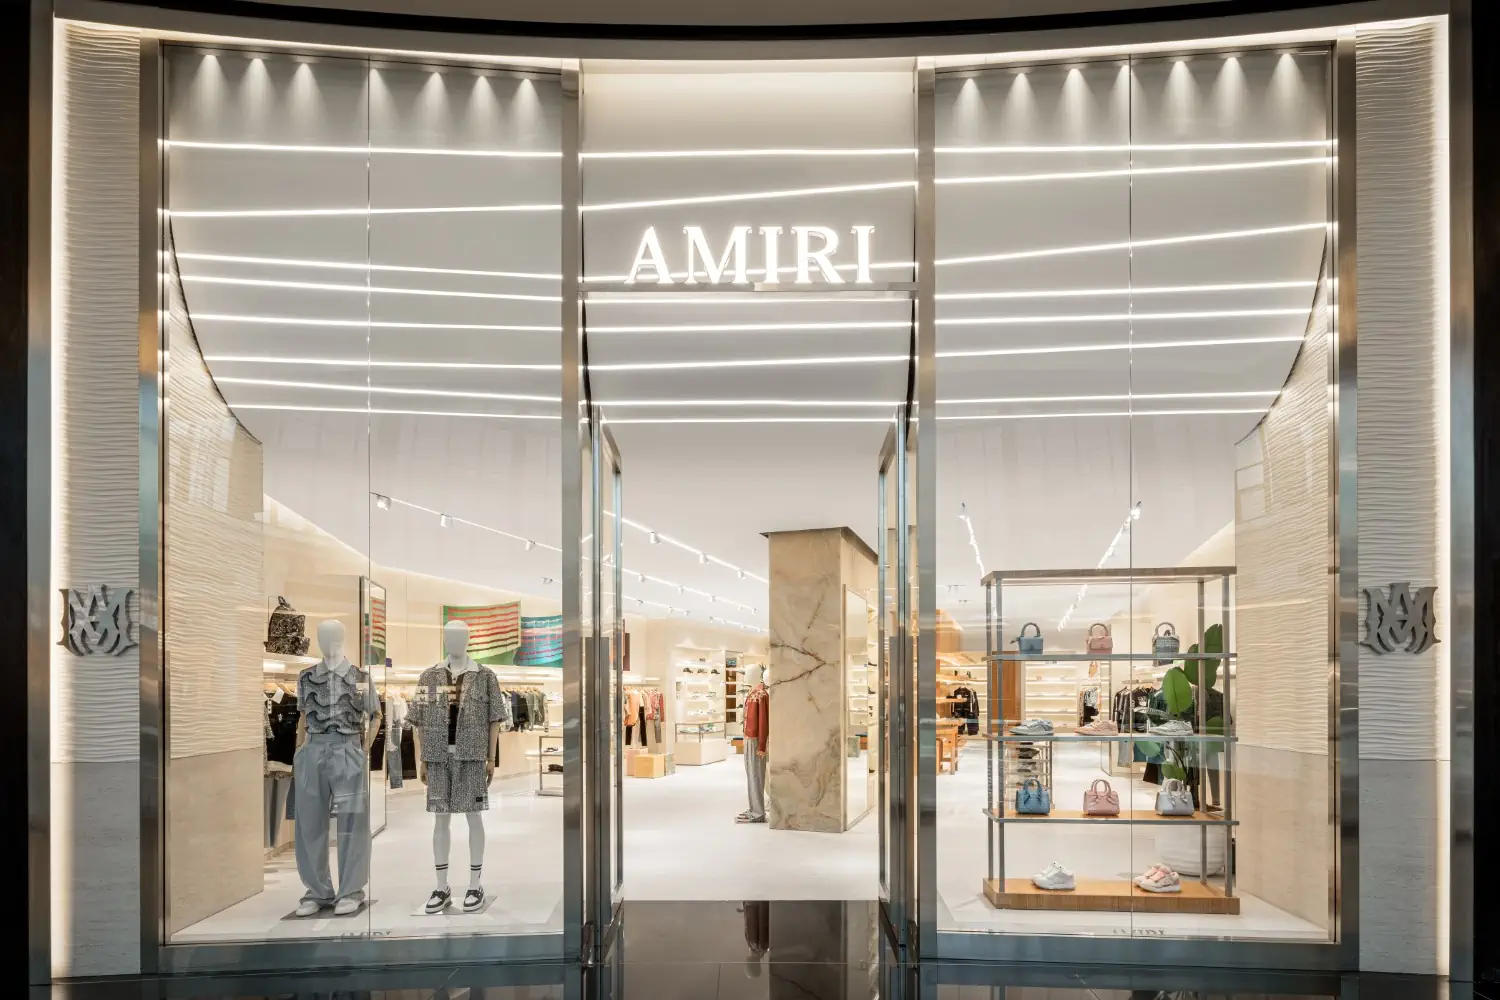 AMIRI expands Middle East presence with second Dubai store